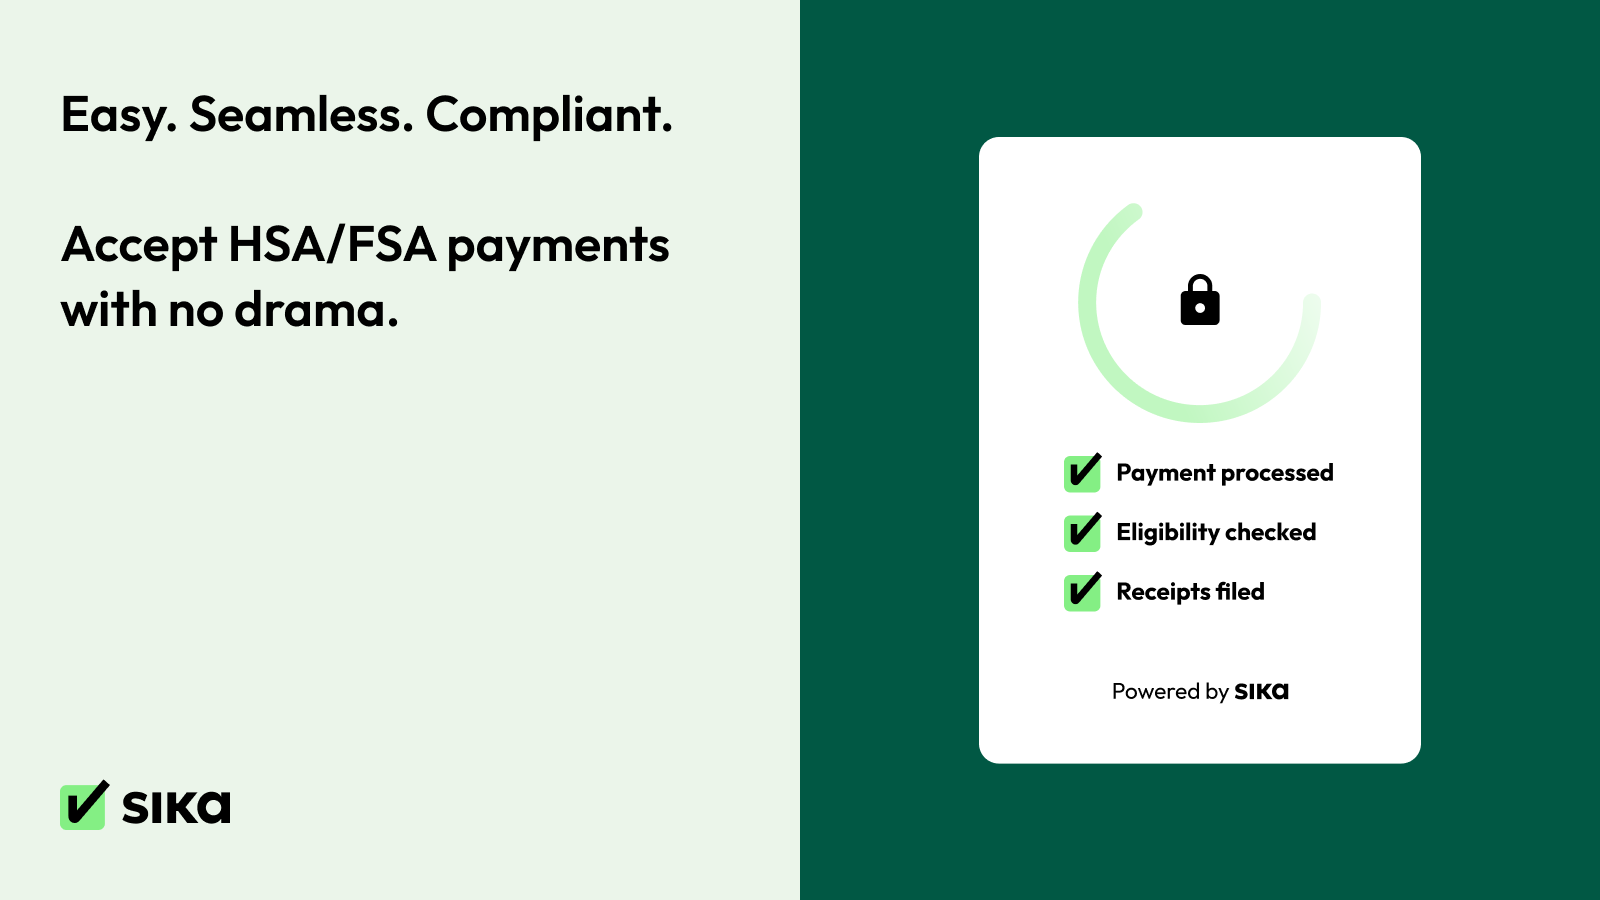 Accept HSA/FSA payments with no drama.